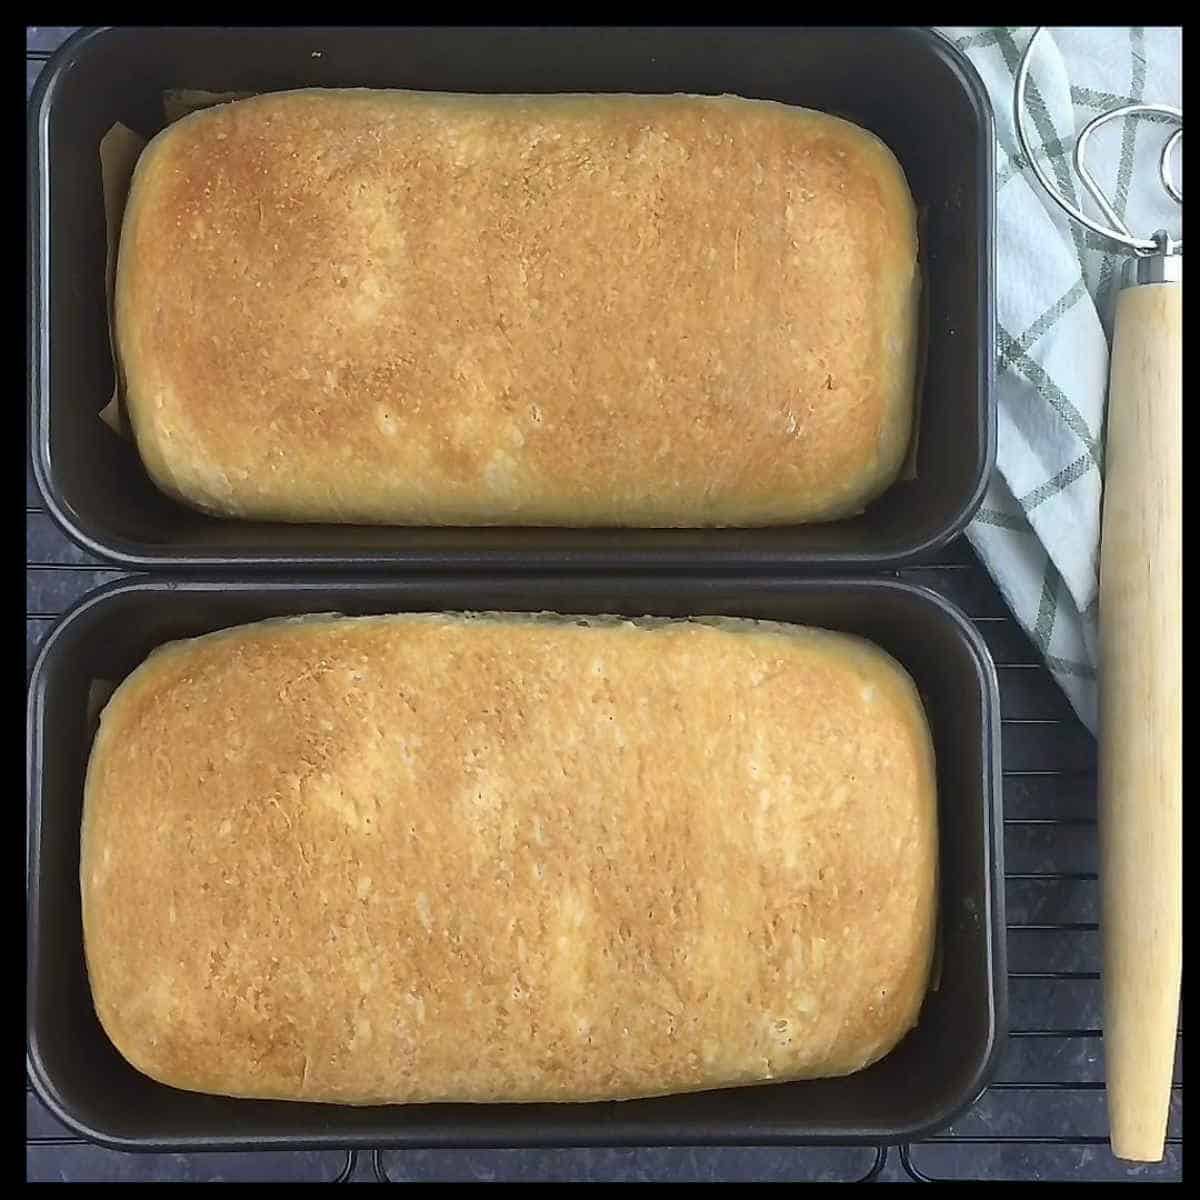 Perfectly baked.